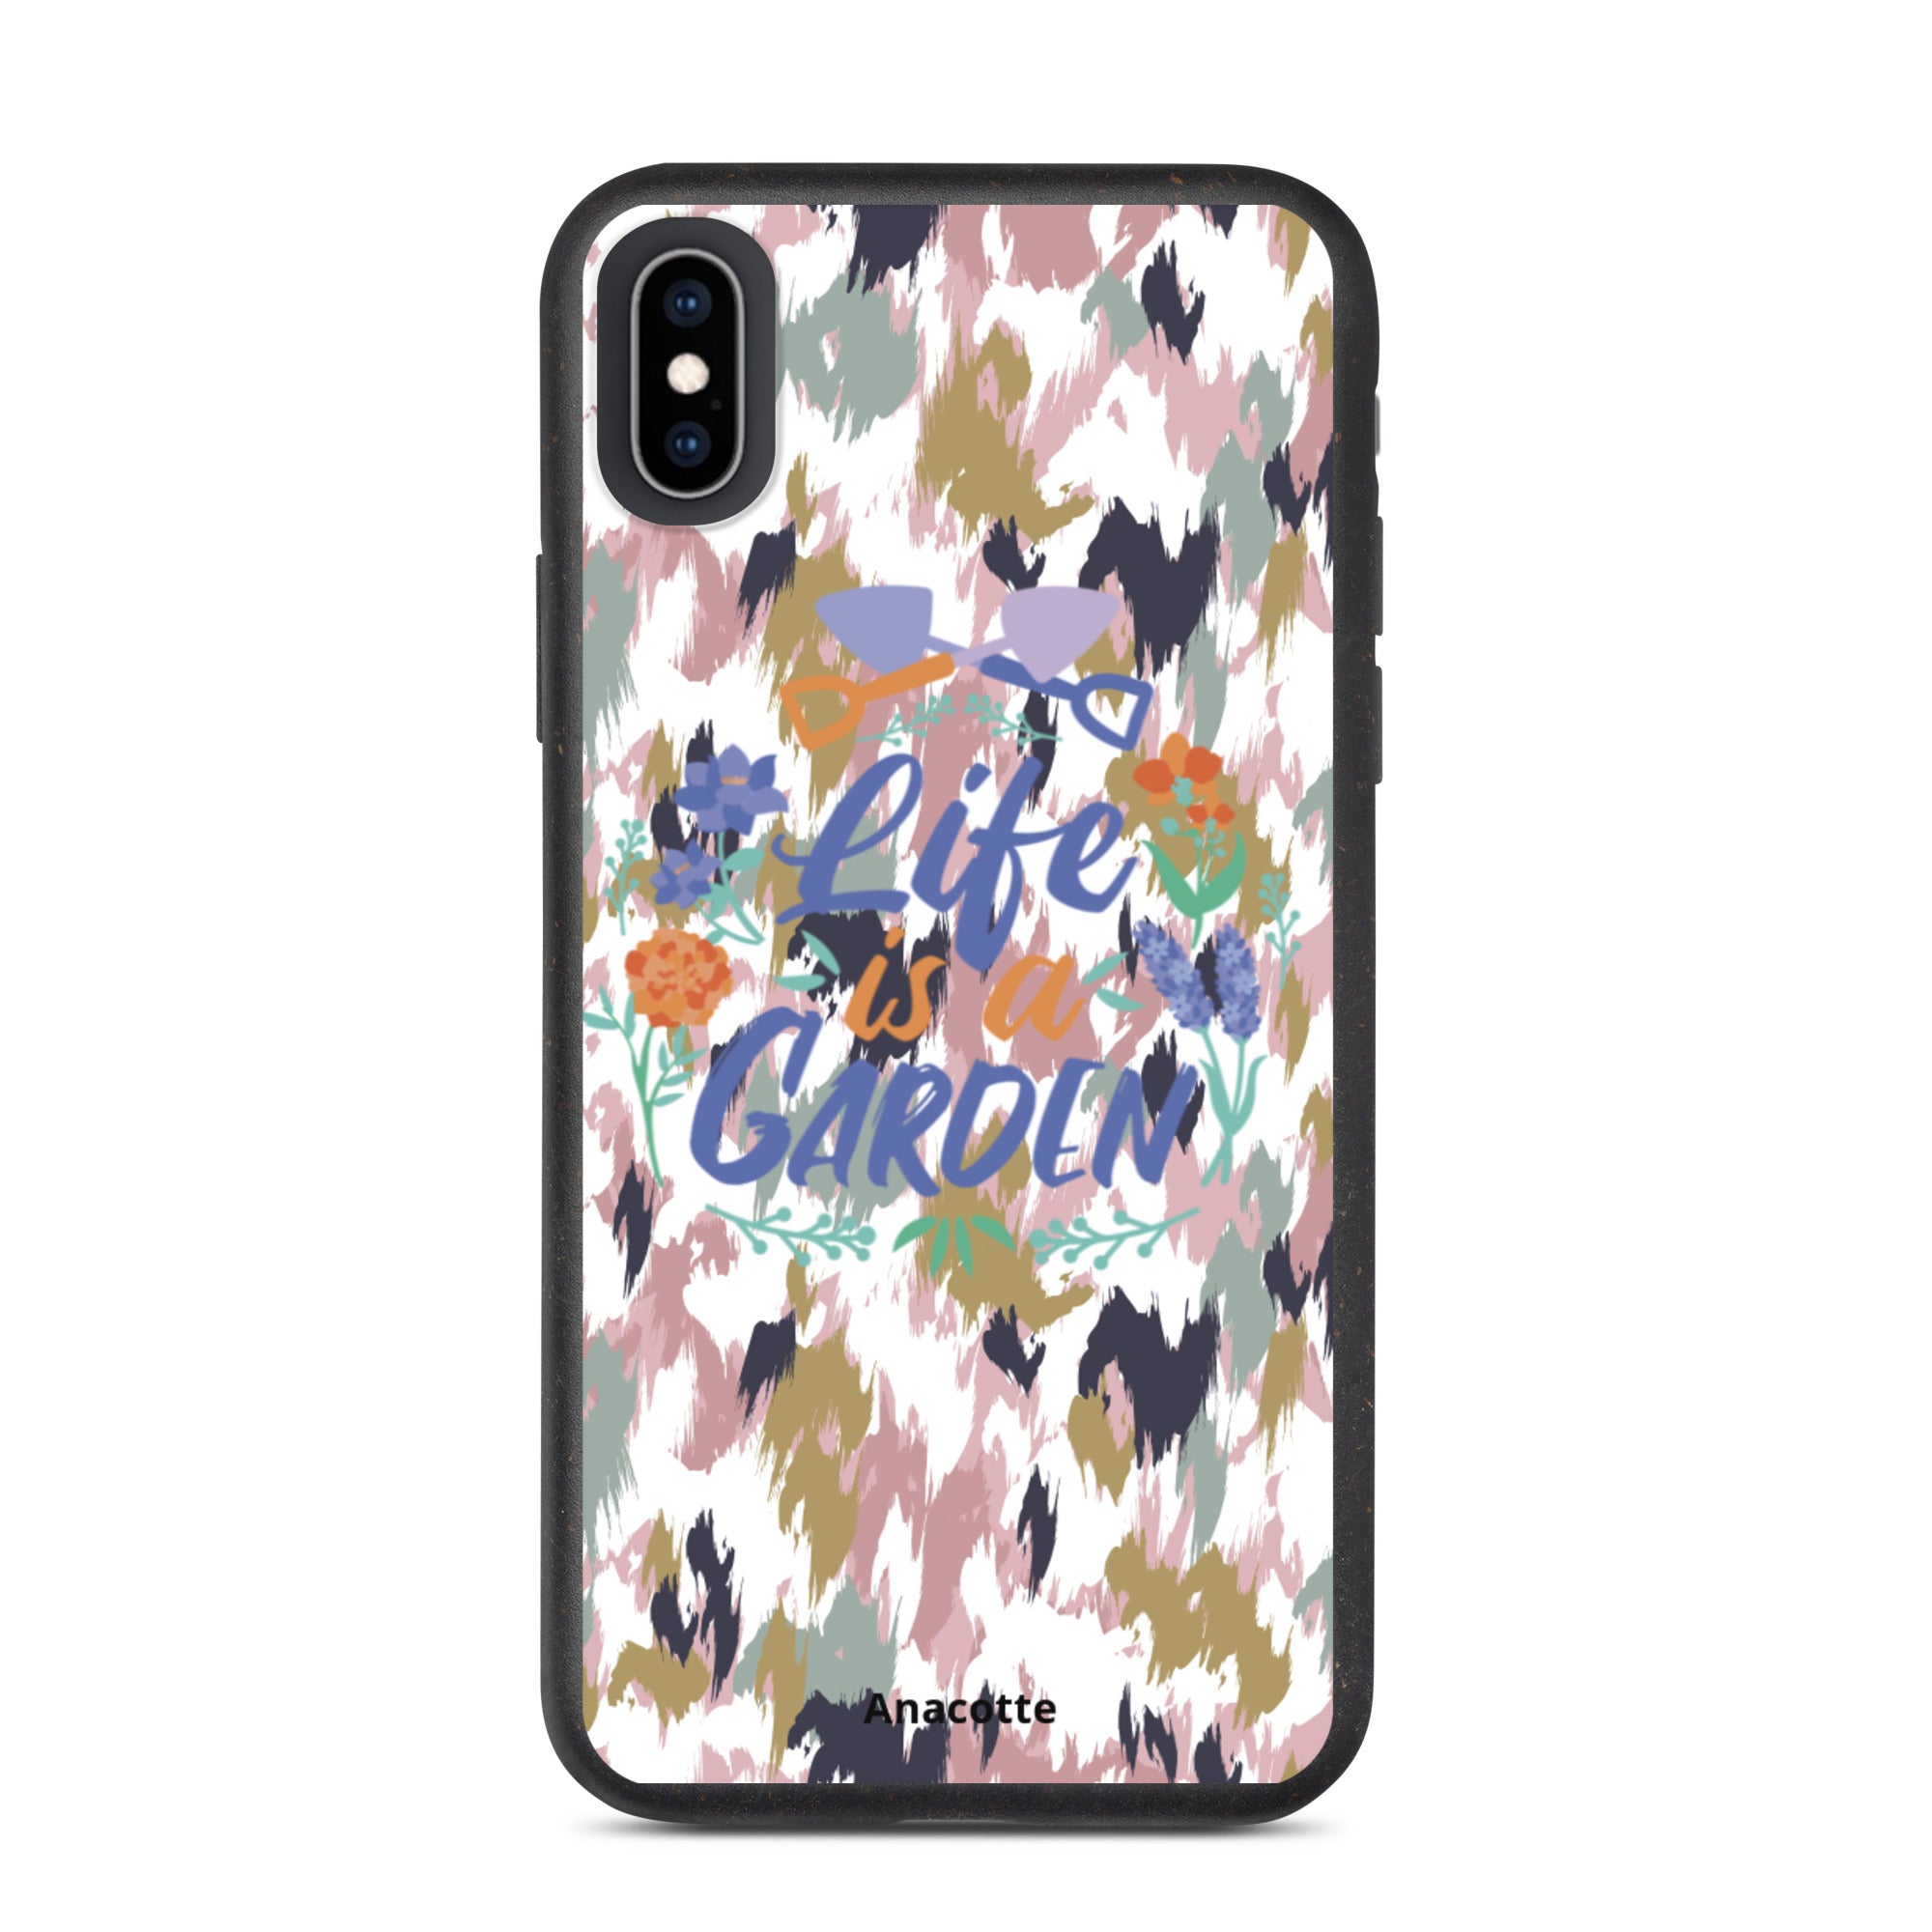 Anacotte Life is a Garden Eco Friendly iPhone 13 Pro Max case